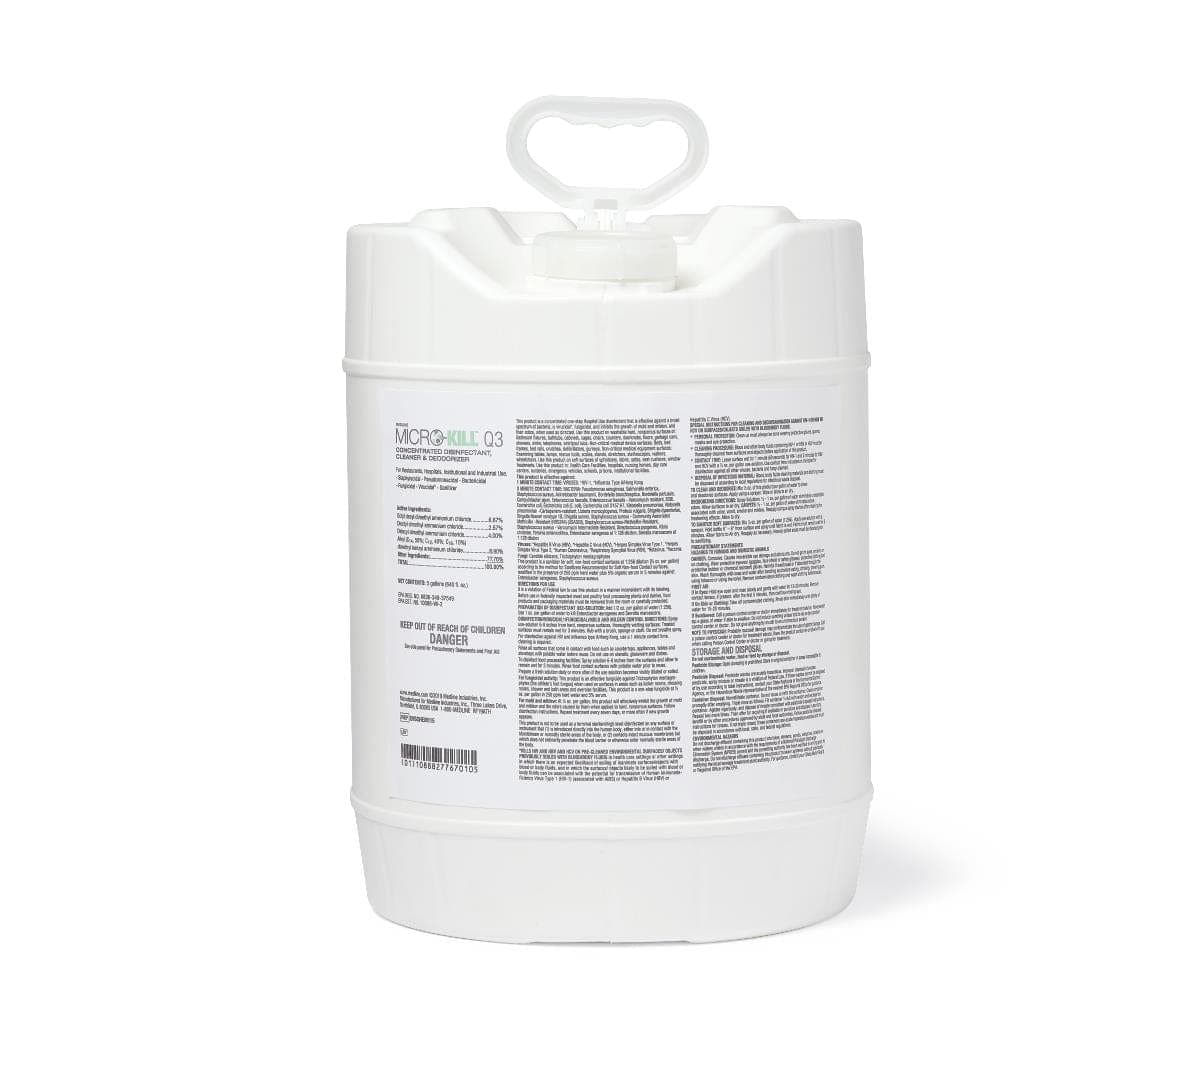 Medline Medline Micro-Kill Q3 Concentrated Disinfectant, Cleaner & Deodorizer